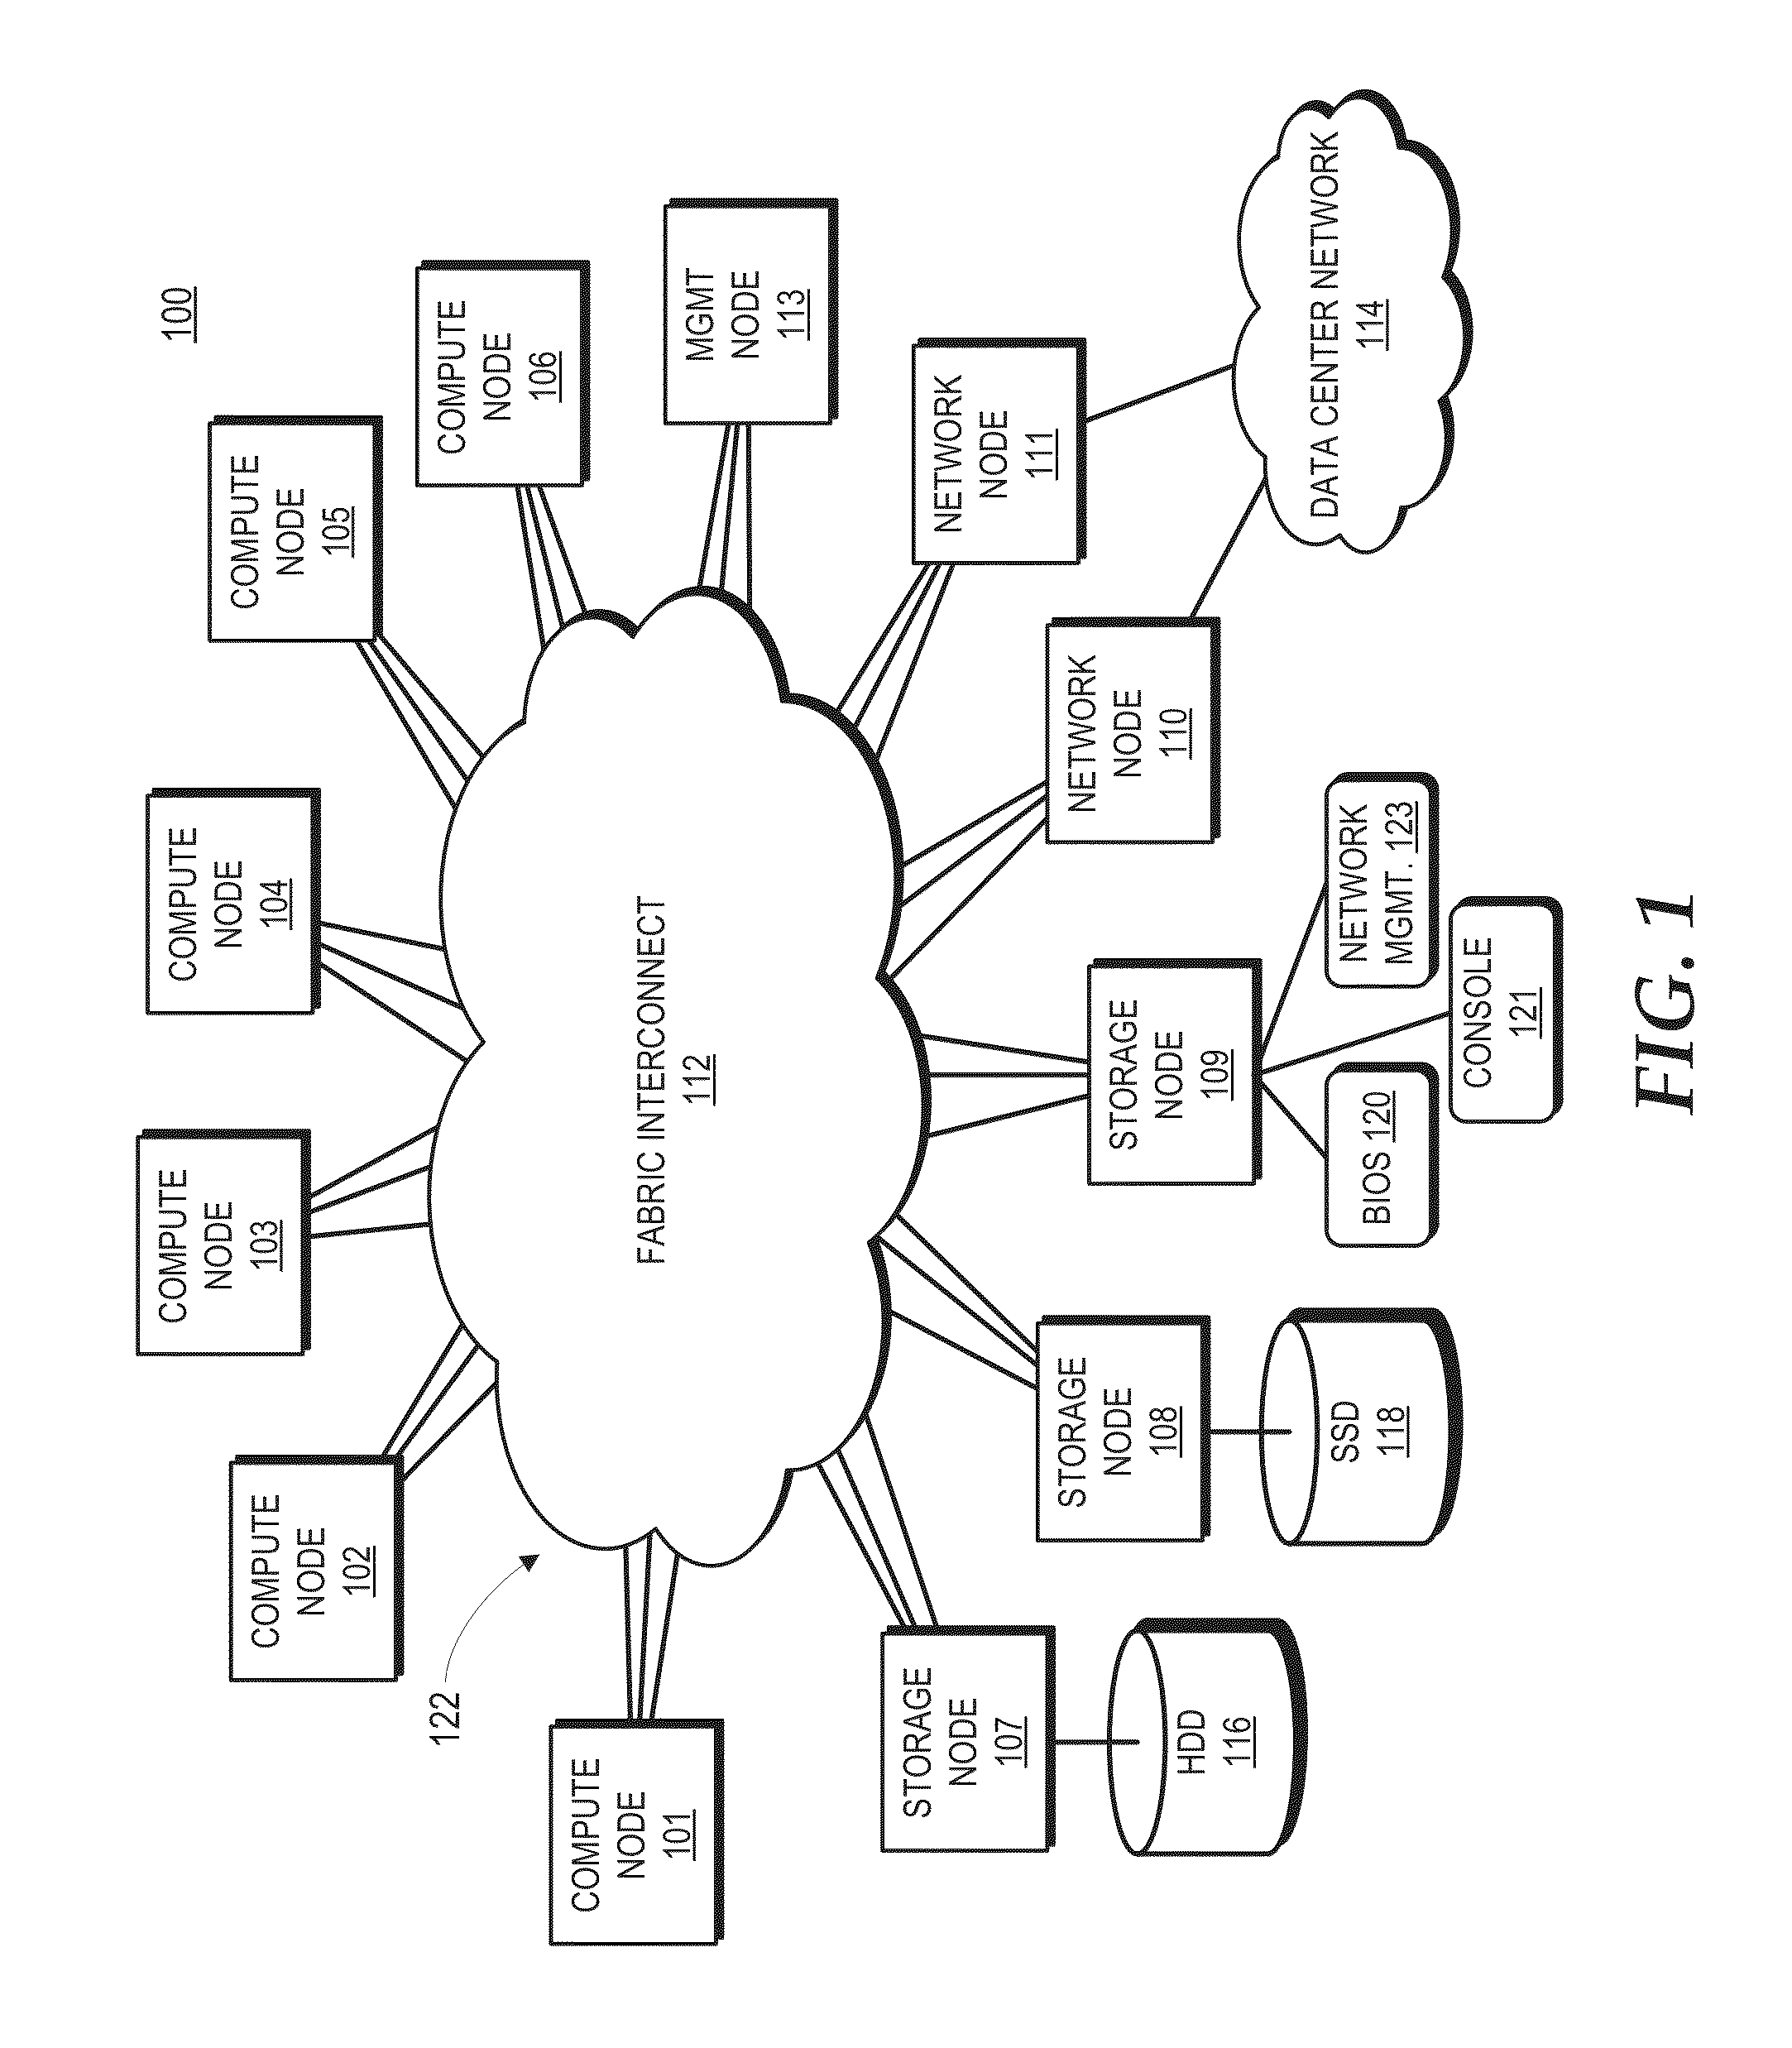 Distributed packet switching in a source routed cluster server